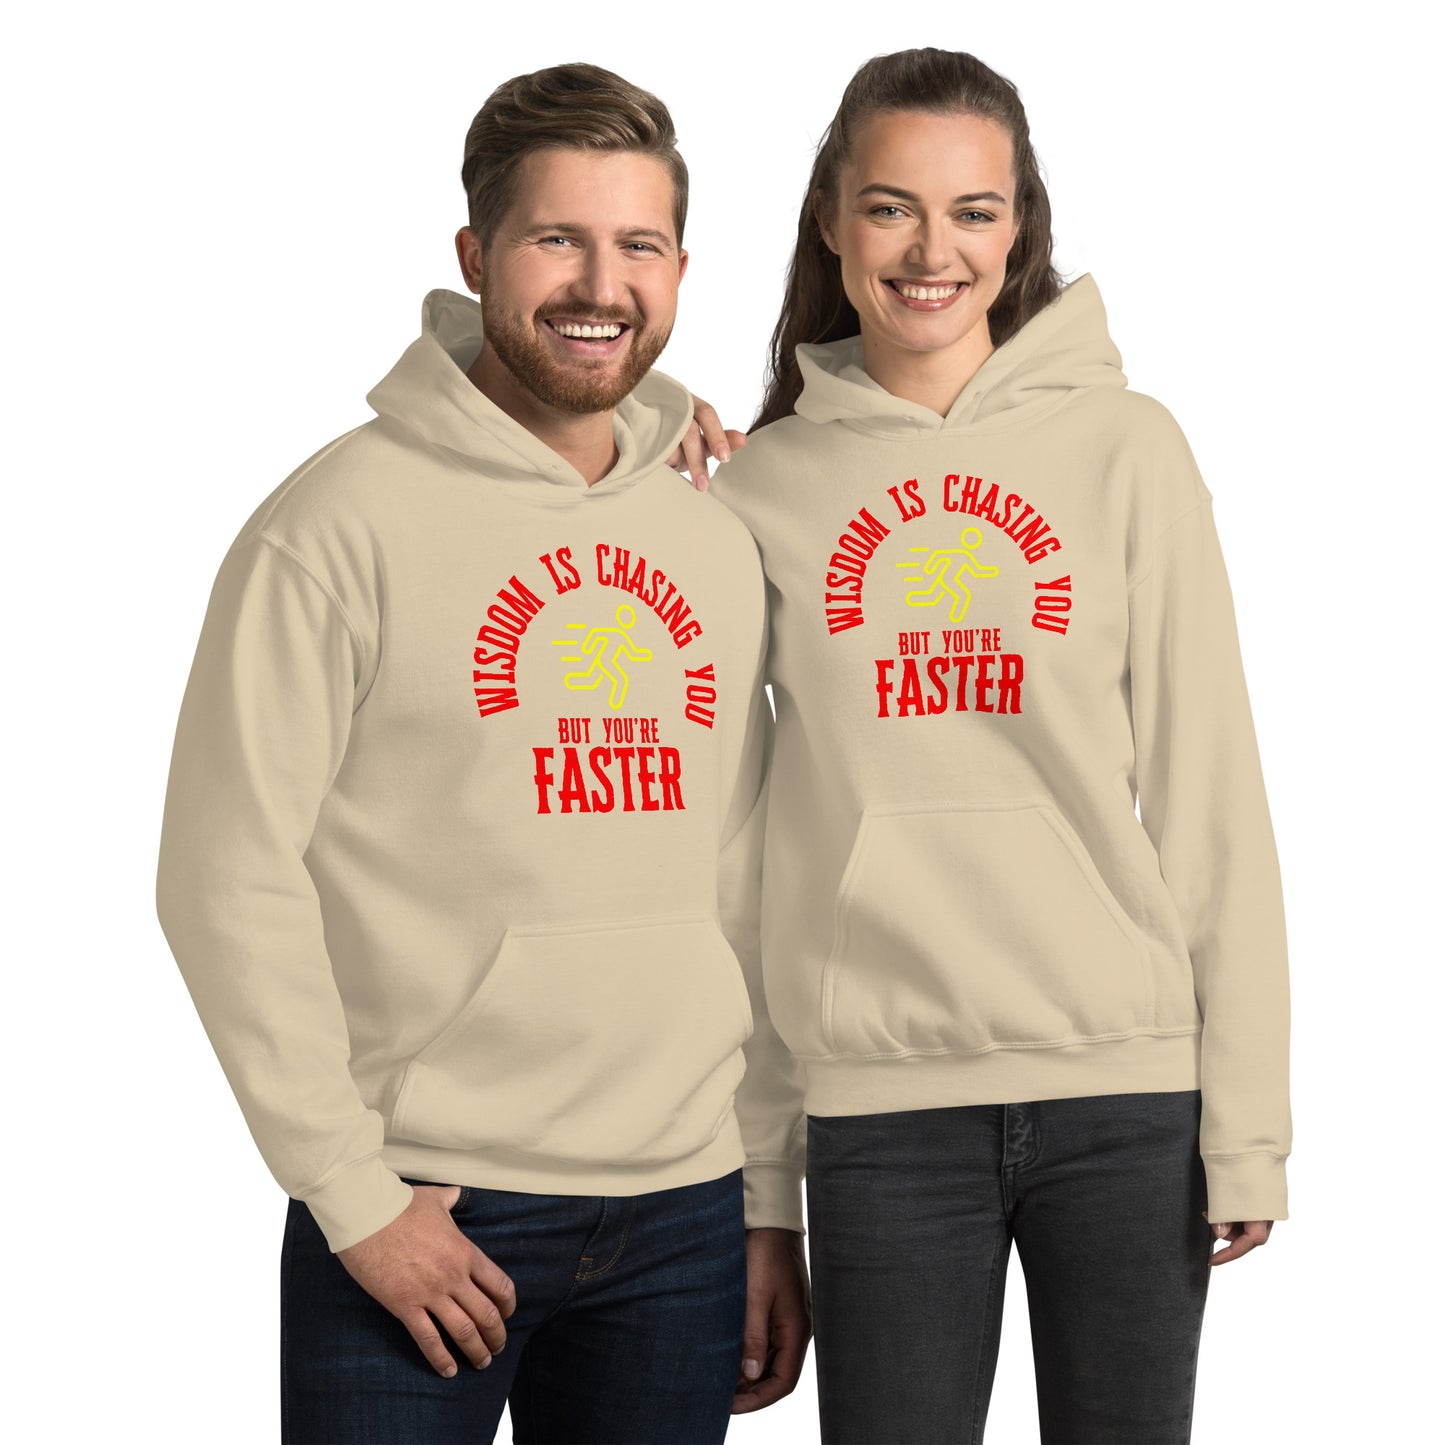 WISDOM IS CHASING YOU BUT YOU'RE FASTER Unisex Hoodie